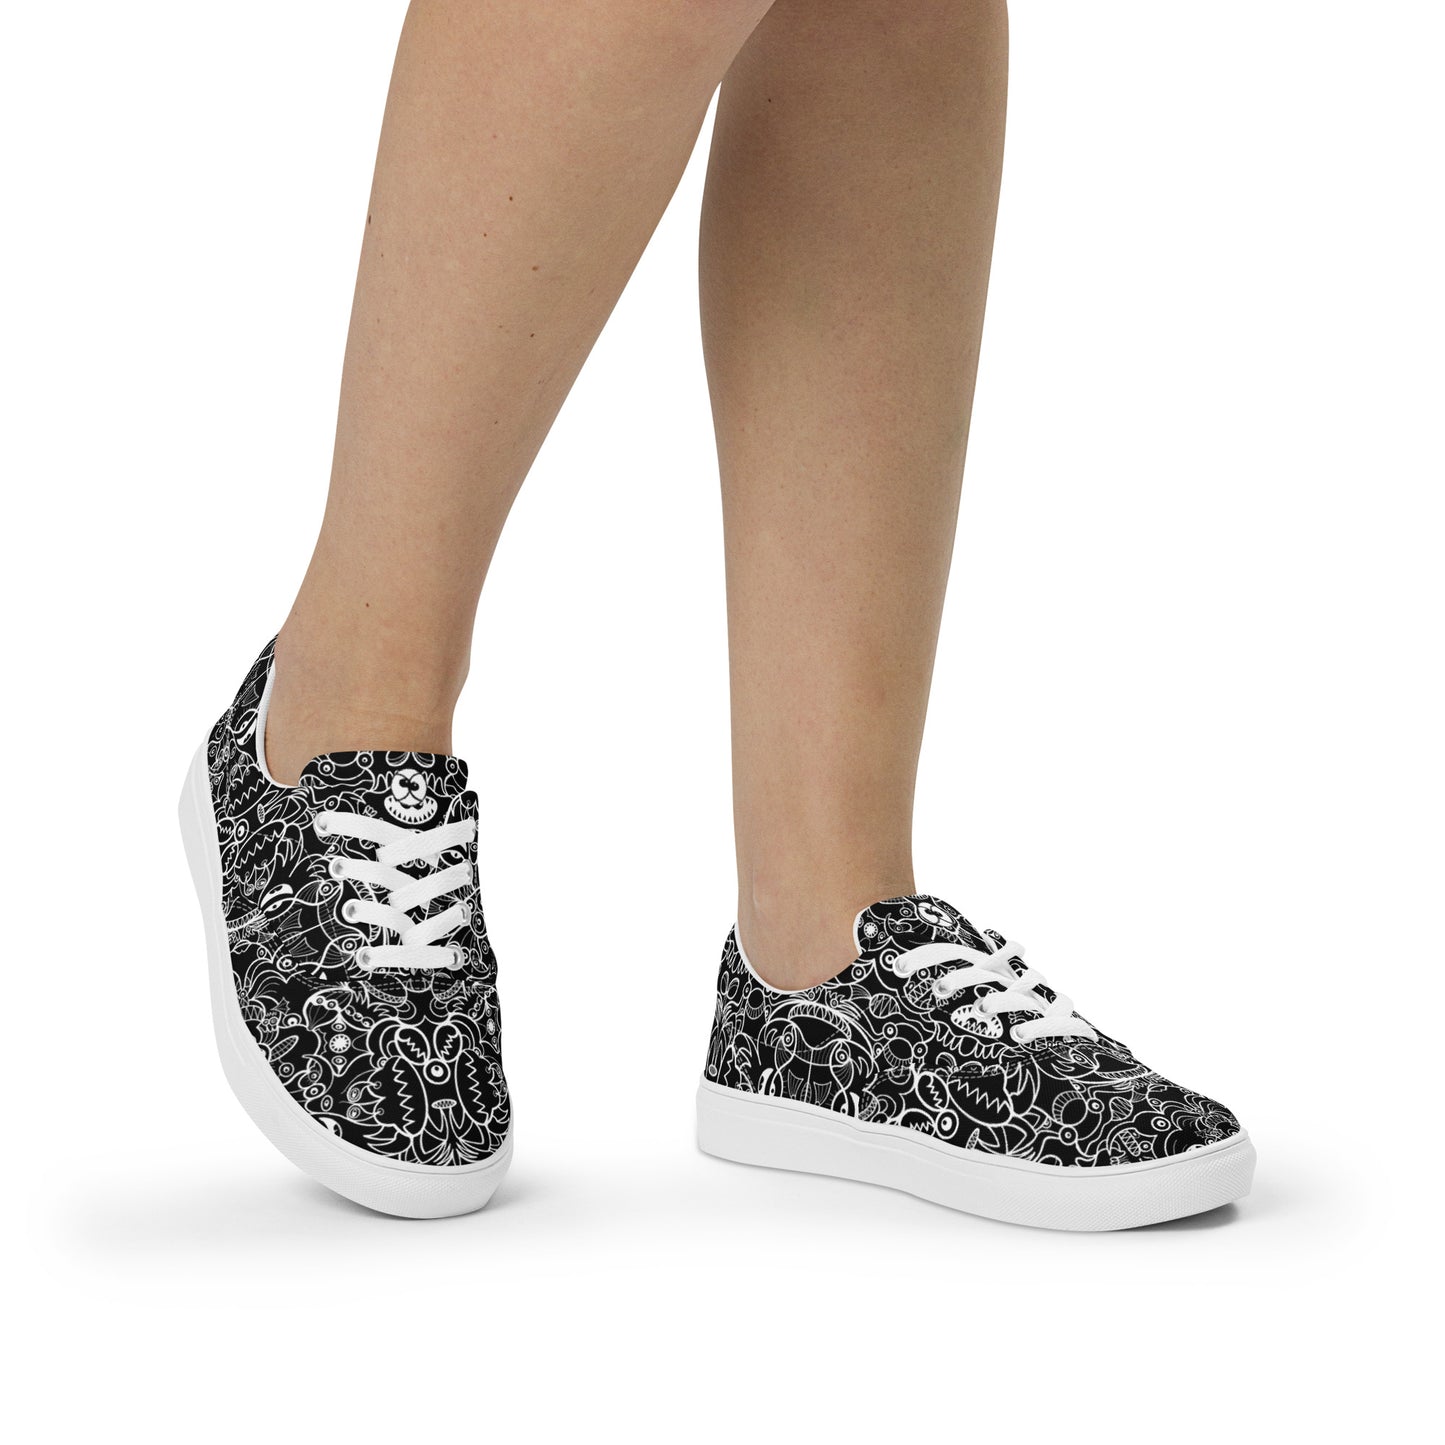 The powerful dark side of the Doodle world Women’s lace-up canvas shoes. Lifestyle